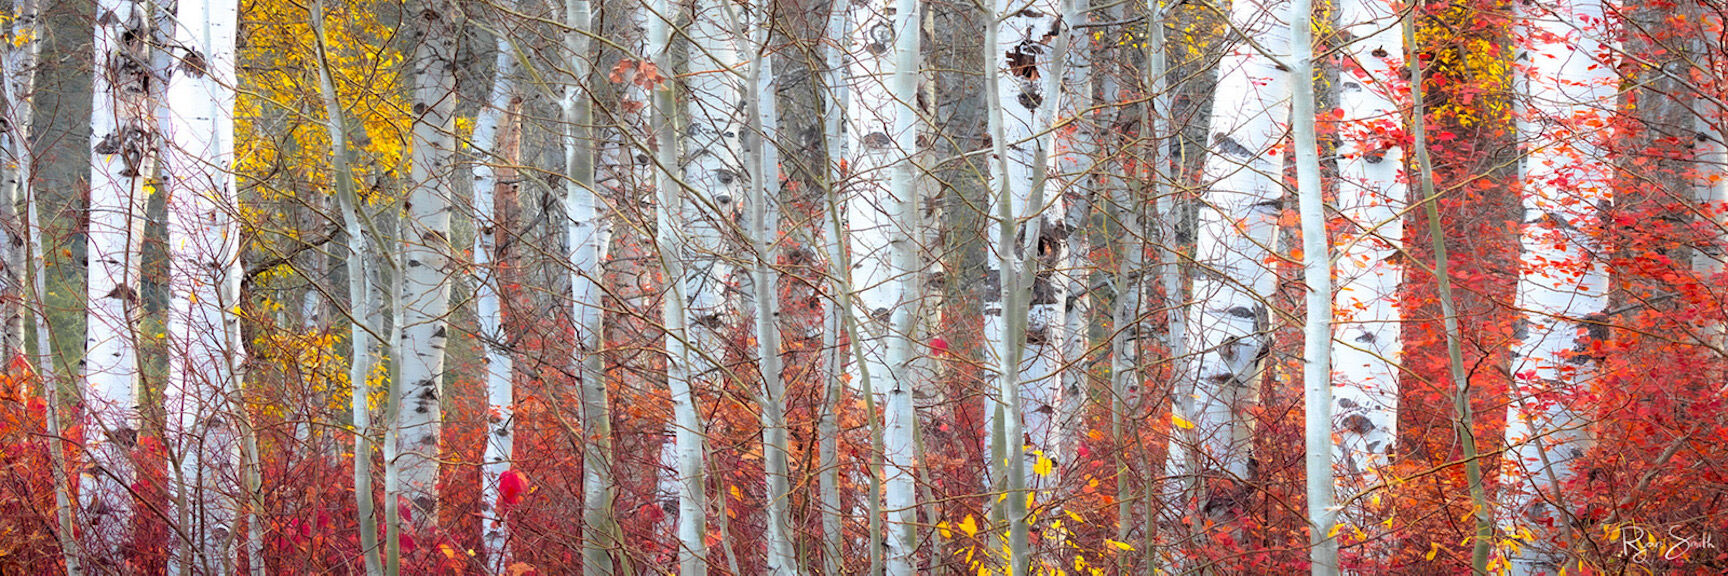 White aspen tree trunks are shown close up in an aspen grove with only a few yellow leaves on the trees and red underbrush in an ultra-wide panoramic format.